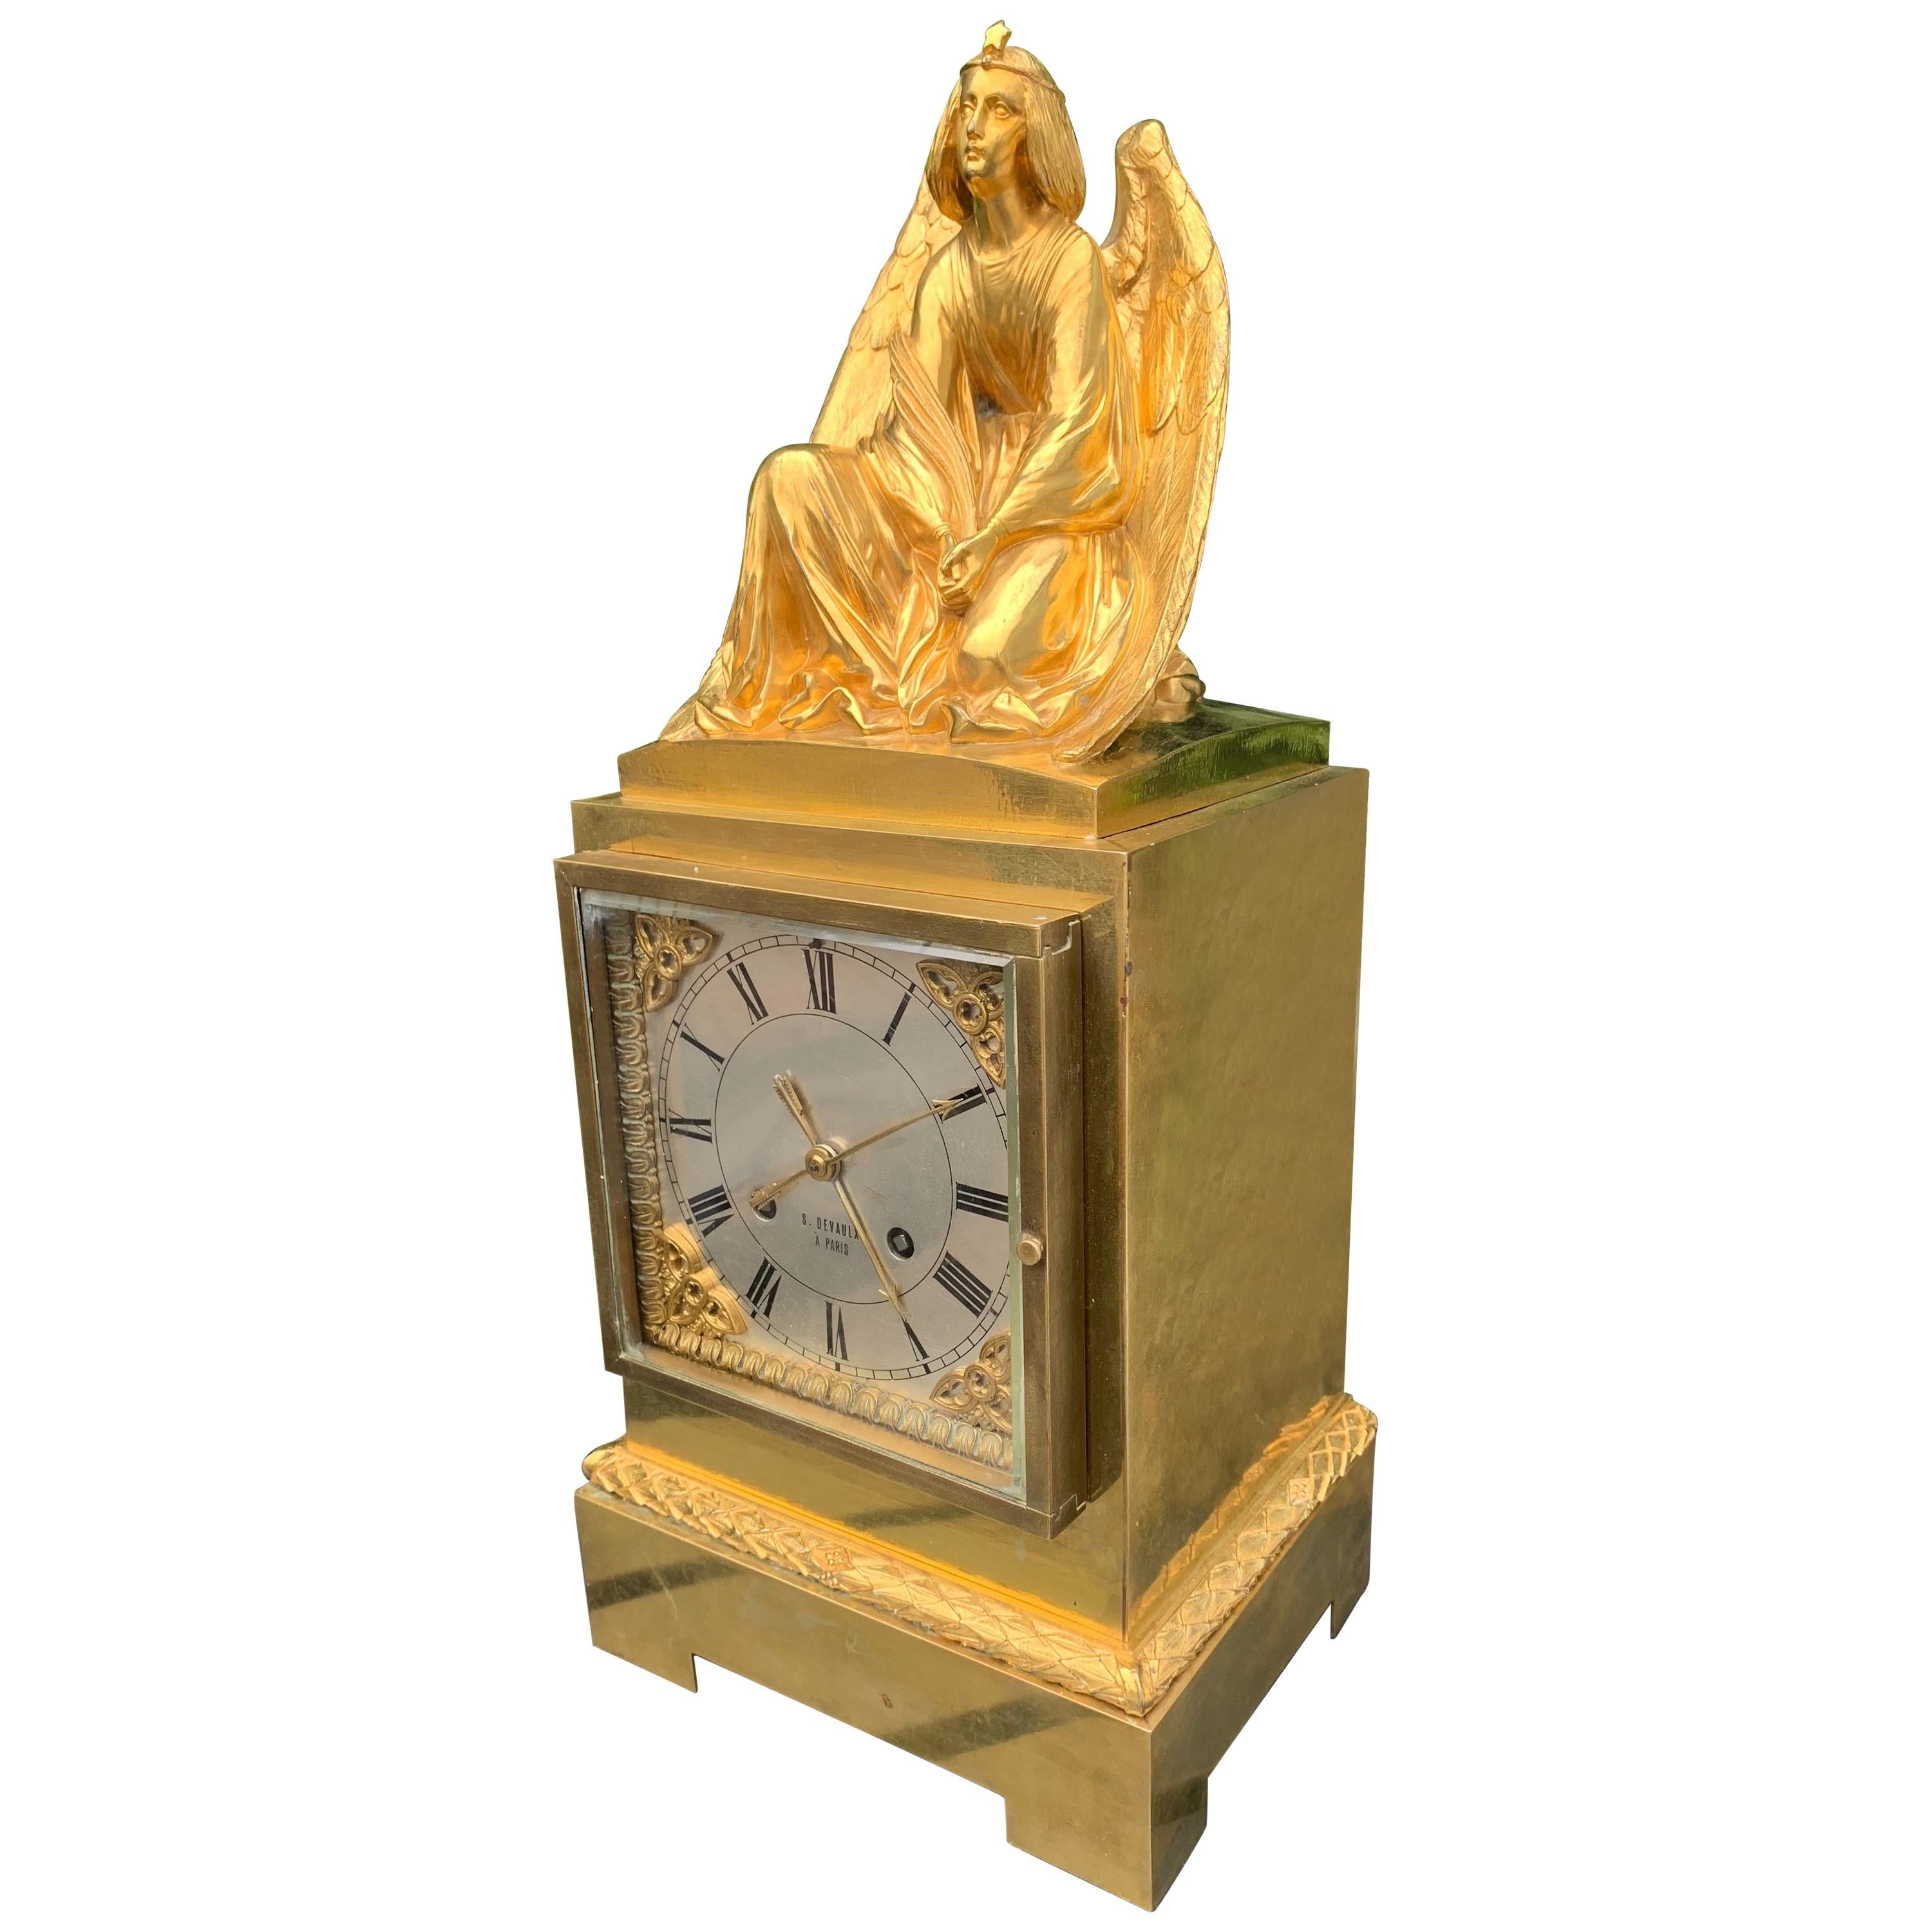 Rare and wonderful antique clock from the early 1800s.  Marked: S. Devaulx, Paris.

Having an impressive, stylish and sizable antique clock like this gracing your mantel piece or side table will instantly change the look and feel of the room she is